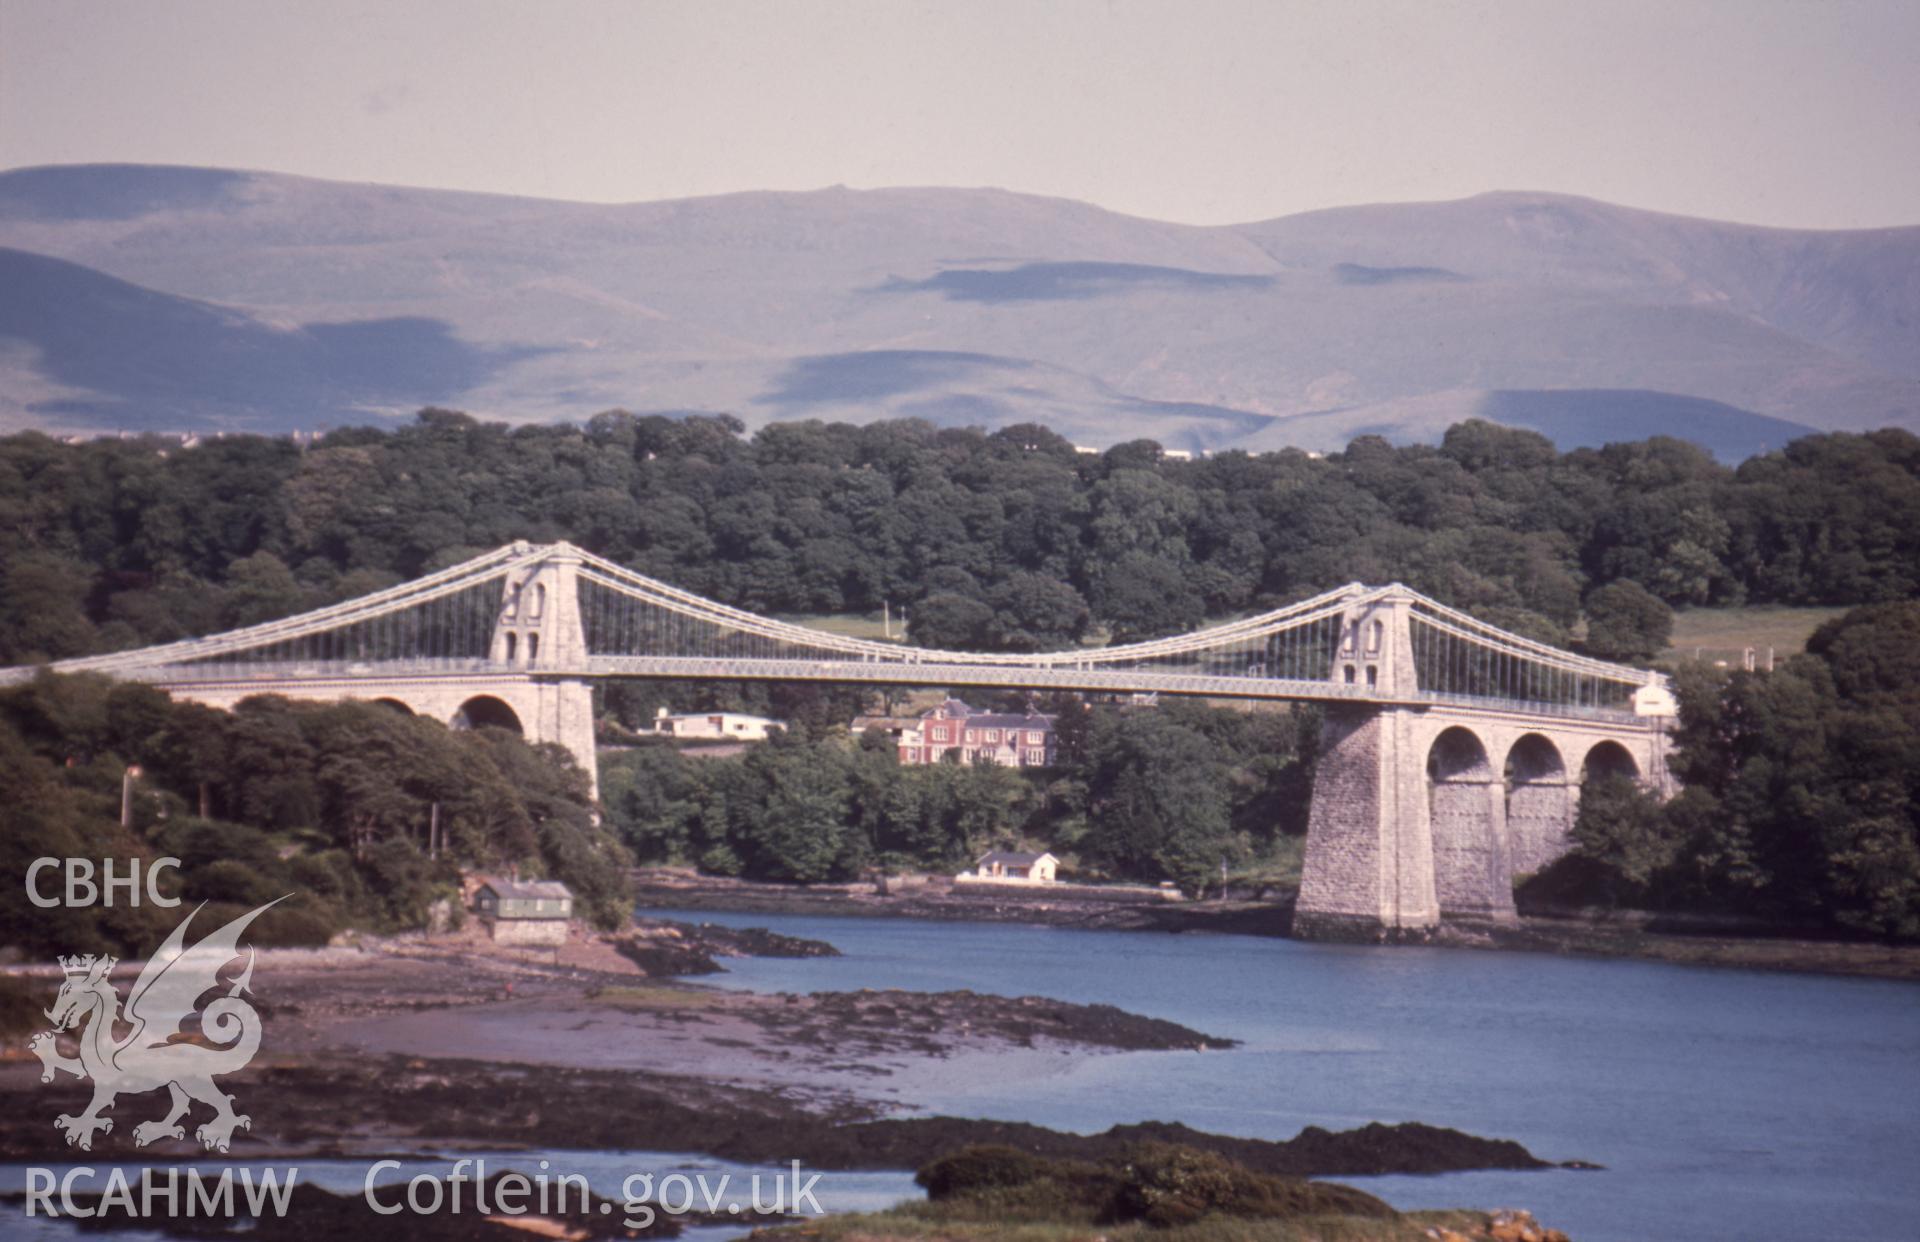 1 colour transparency showing view of Menai suspension bridge; collated by the former Central Office of Information.